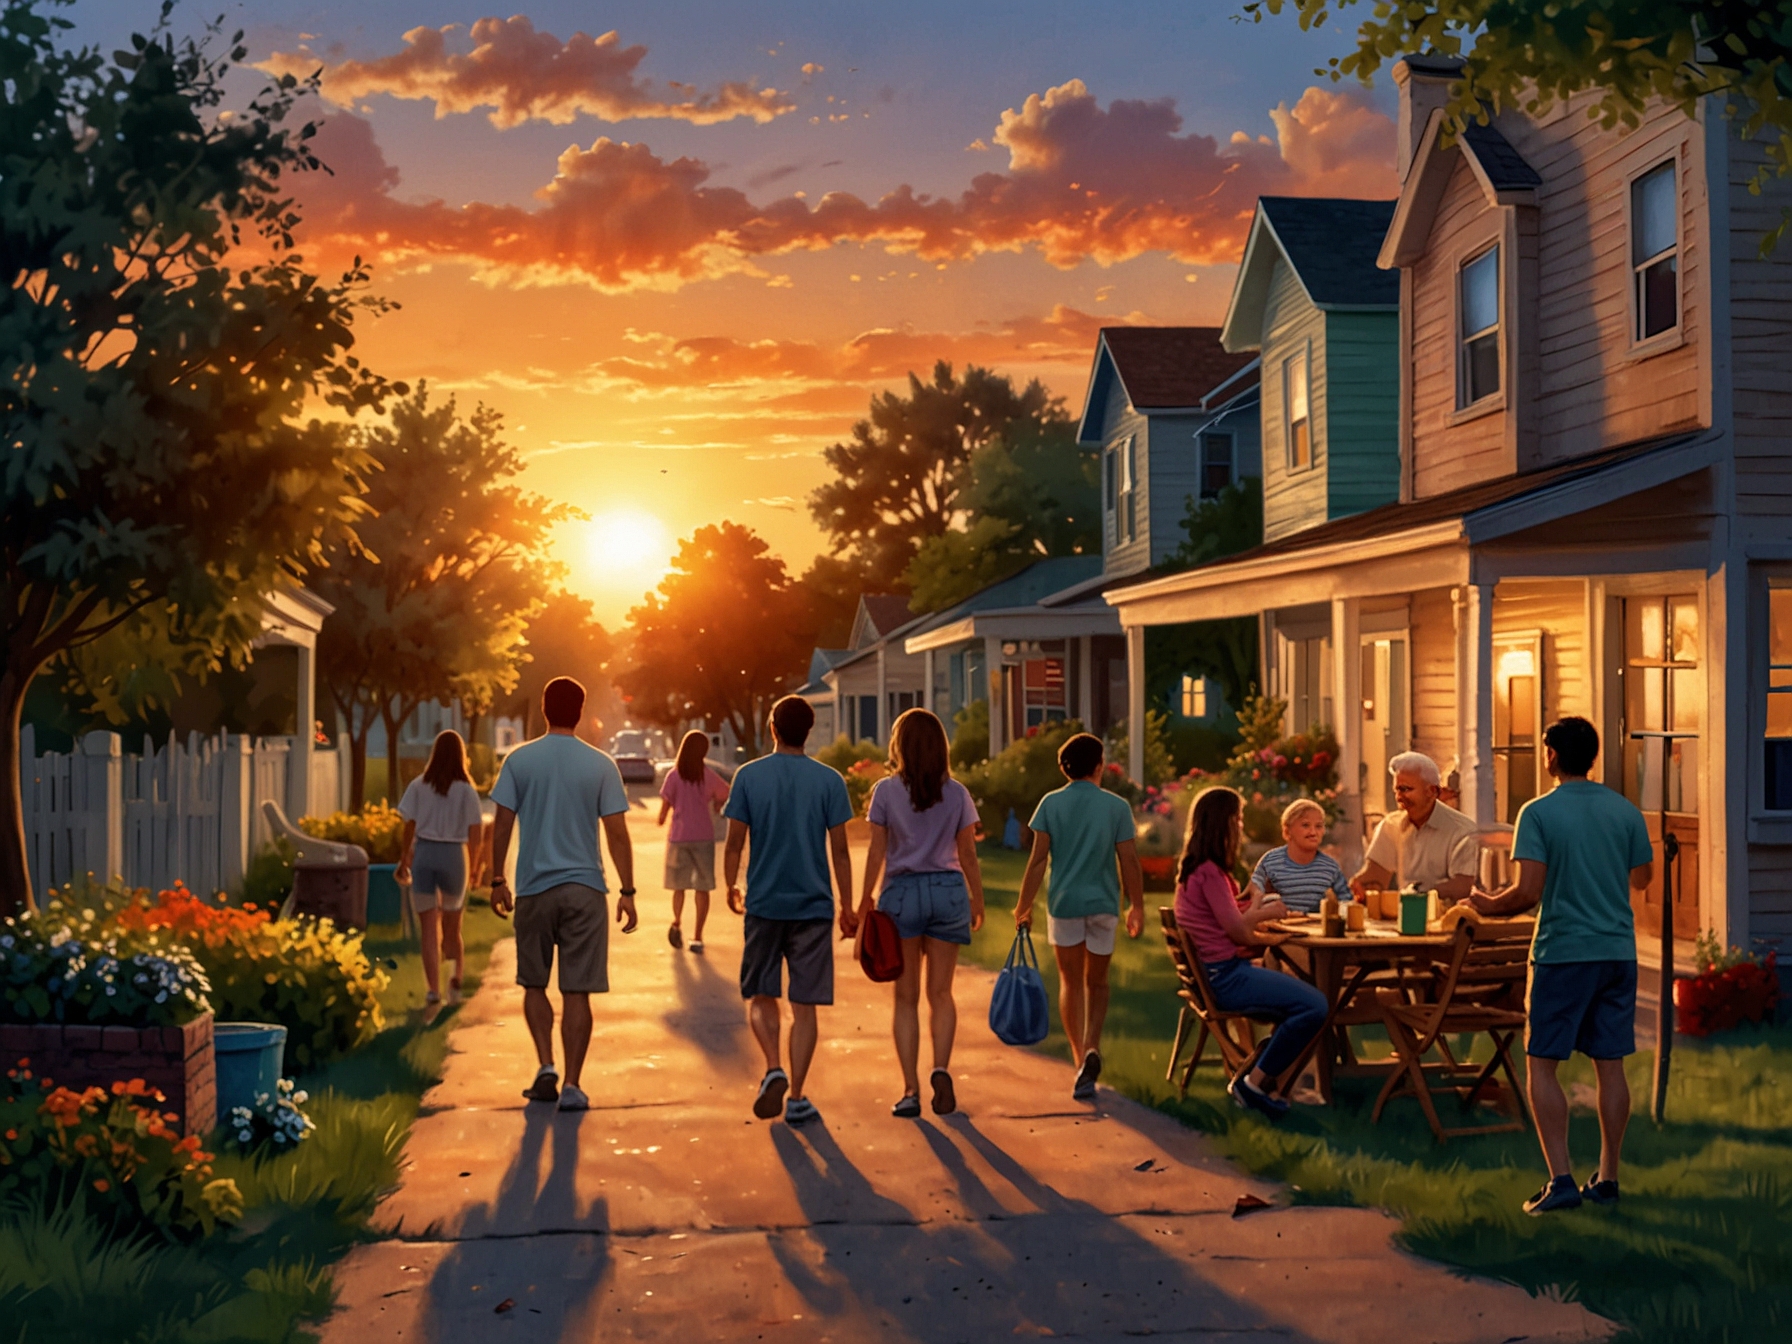 A neighborhood comes alive in the cooler evening, with families gathering for cookouts and leisurely walks under the vibrant hues of a setting sun.